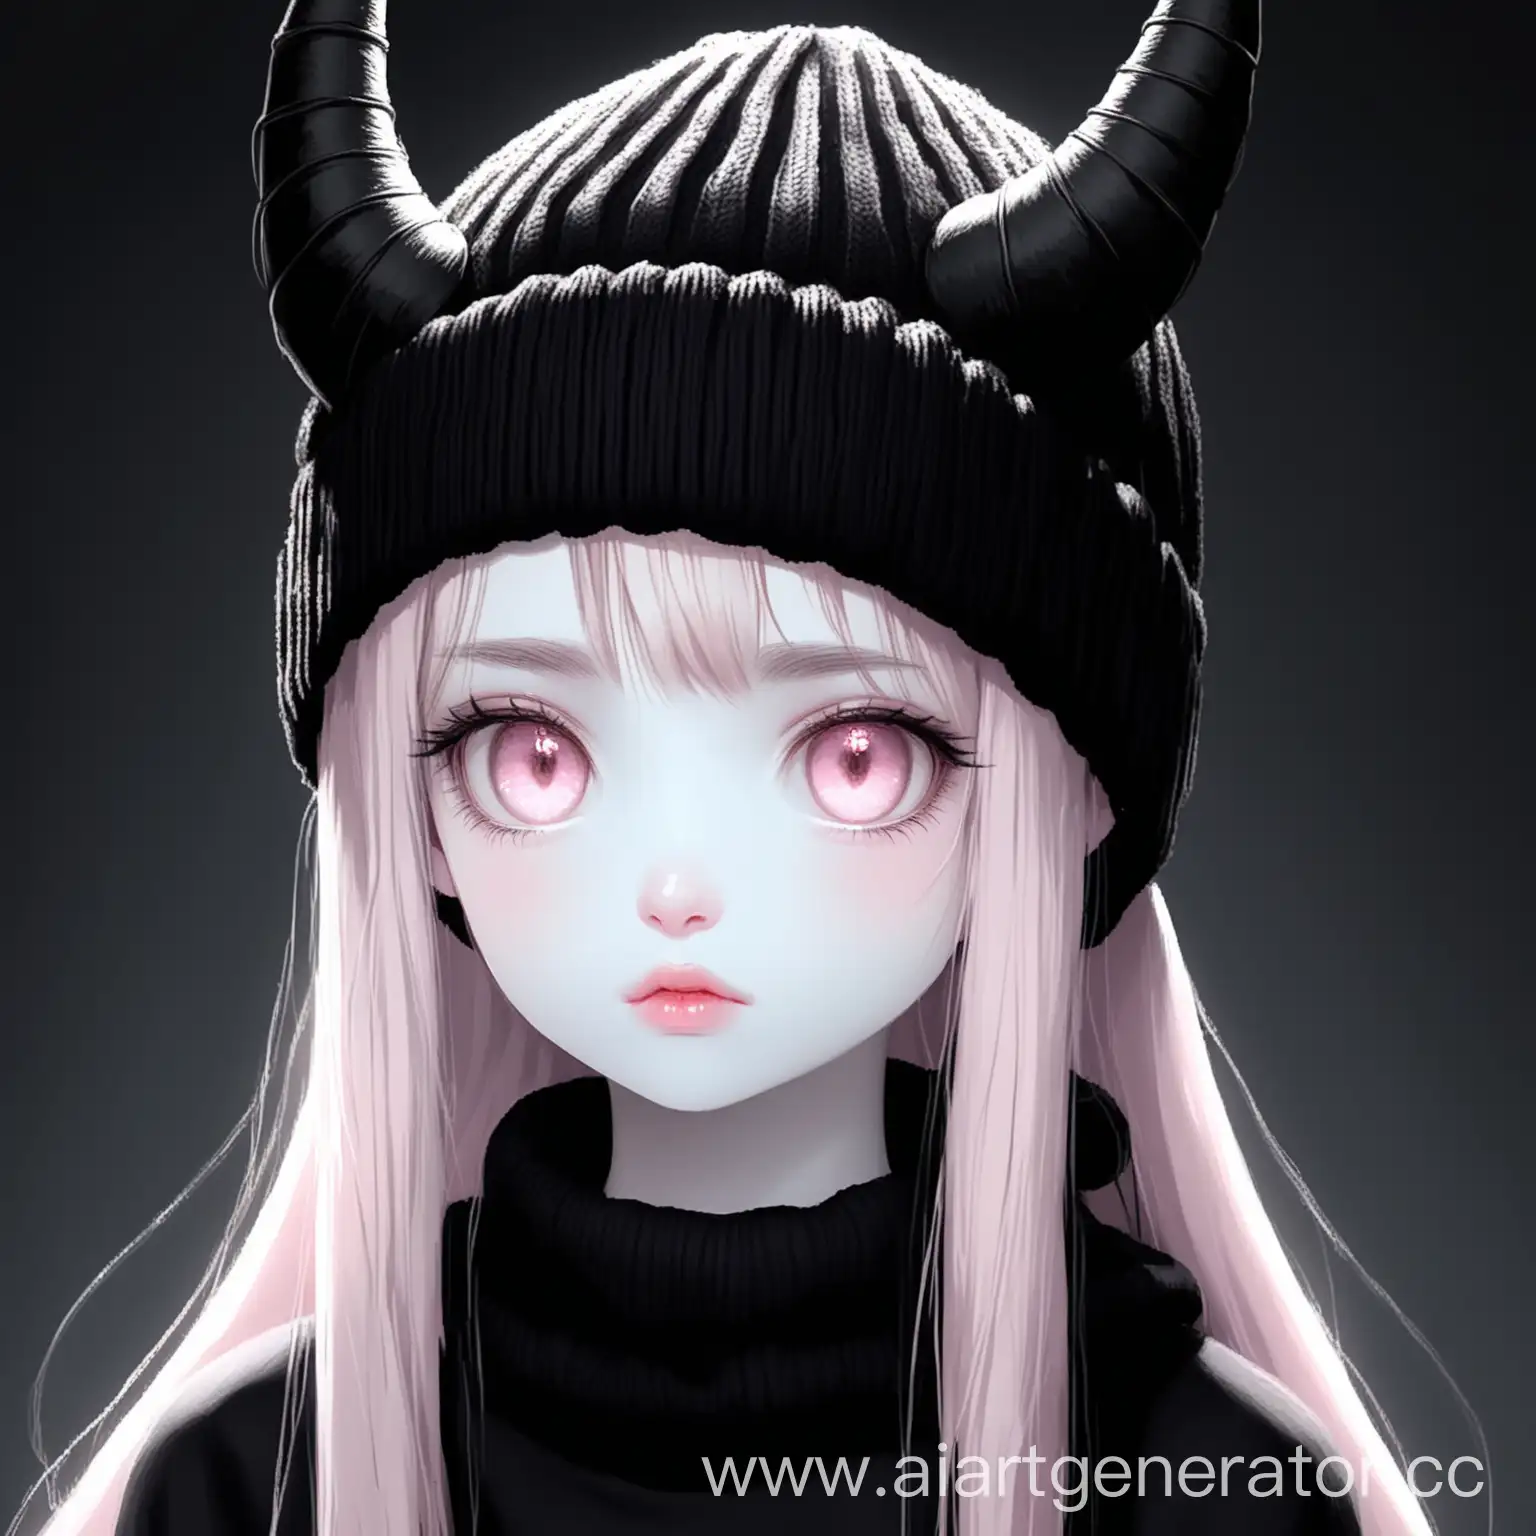 Teenage-Girl-with-Rosy-Cheeks-and-Black-Demon-Horns-Knitted-Hat